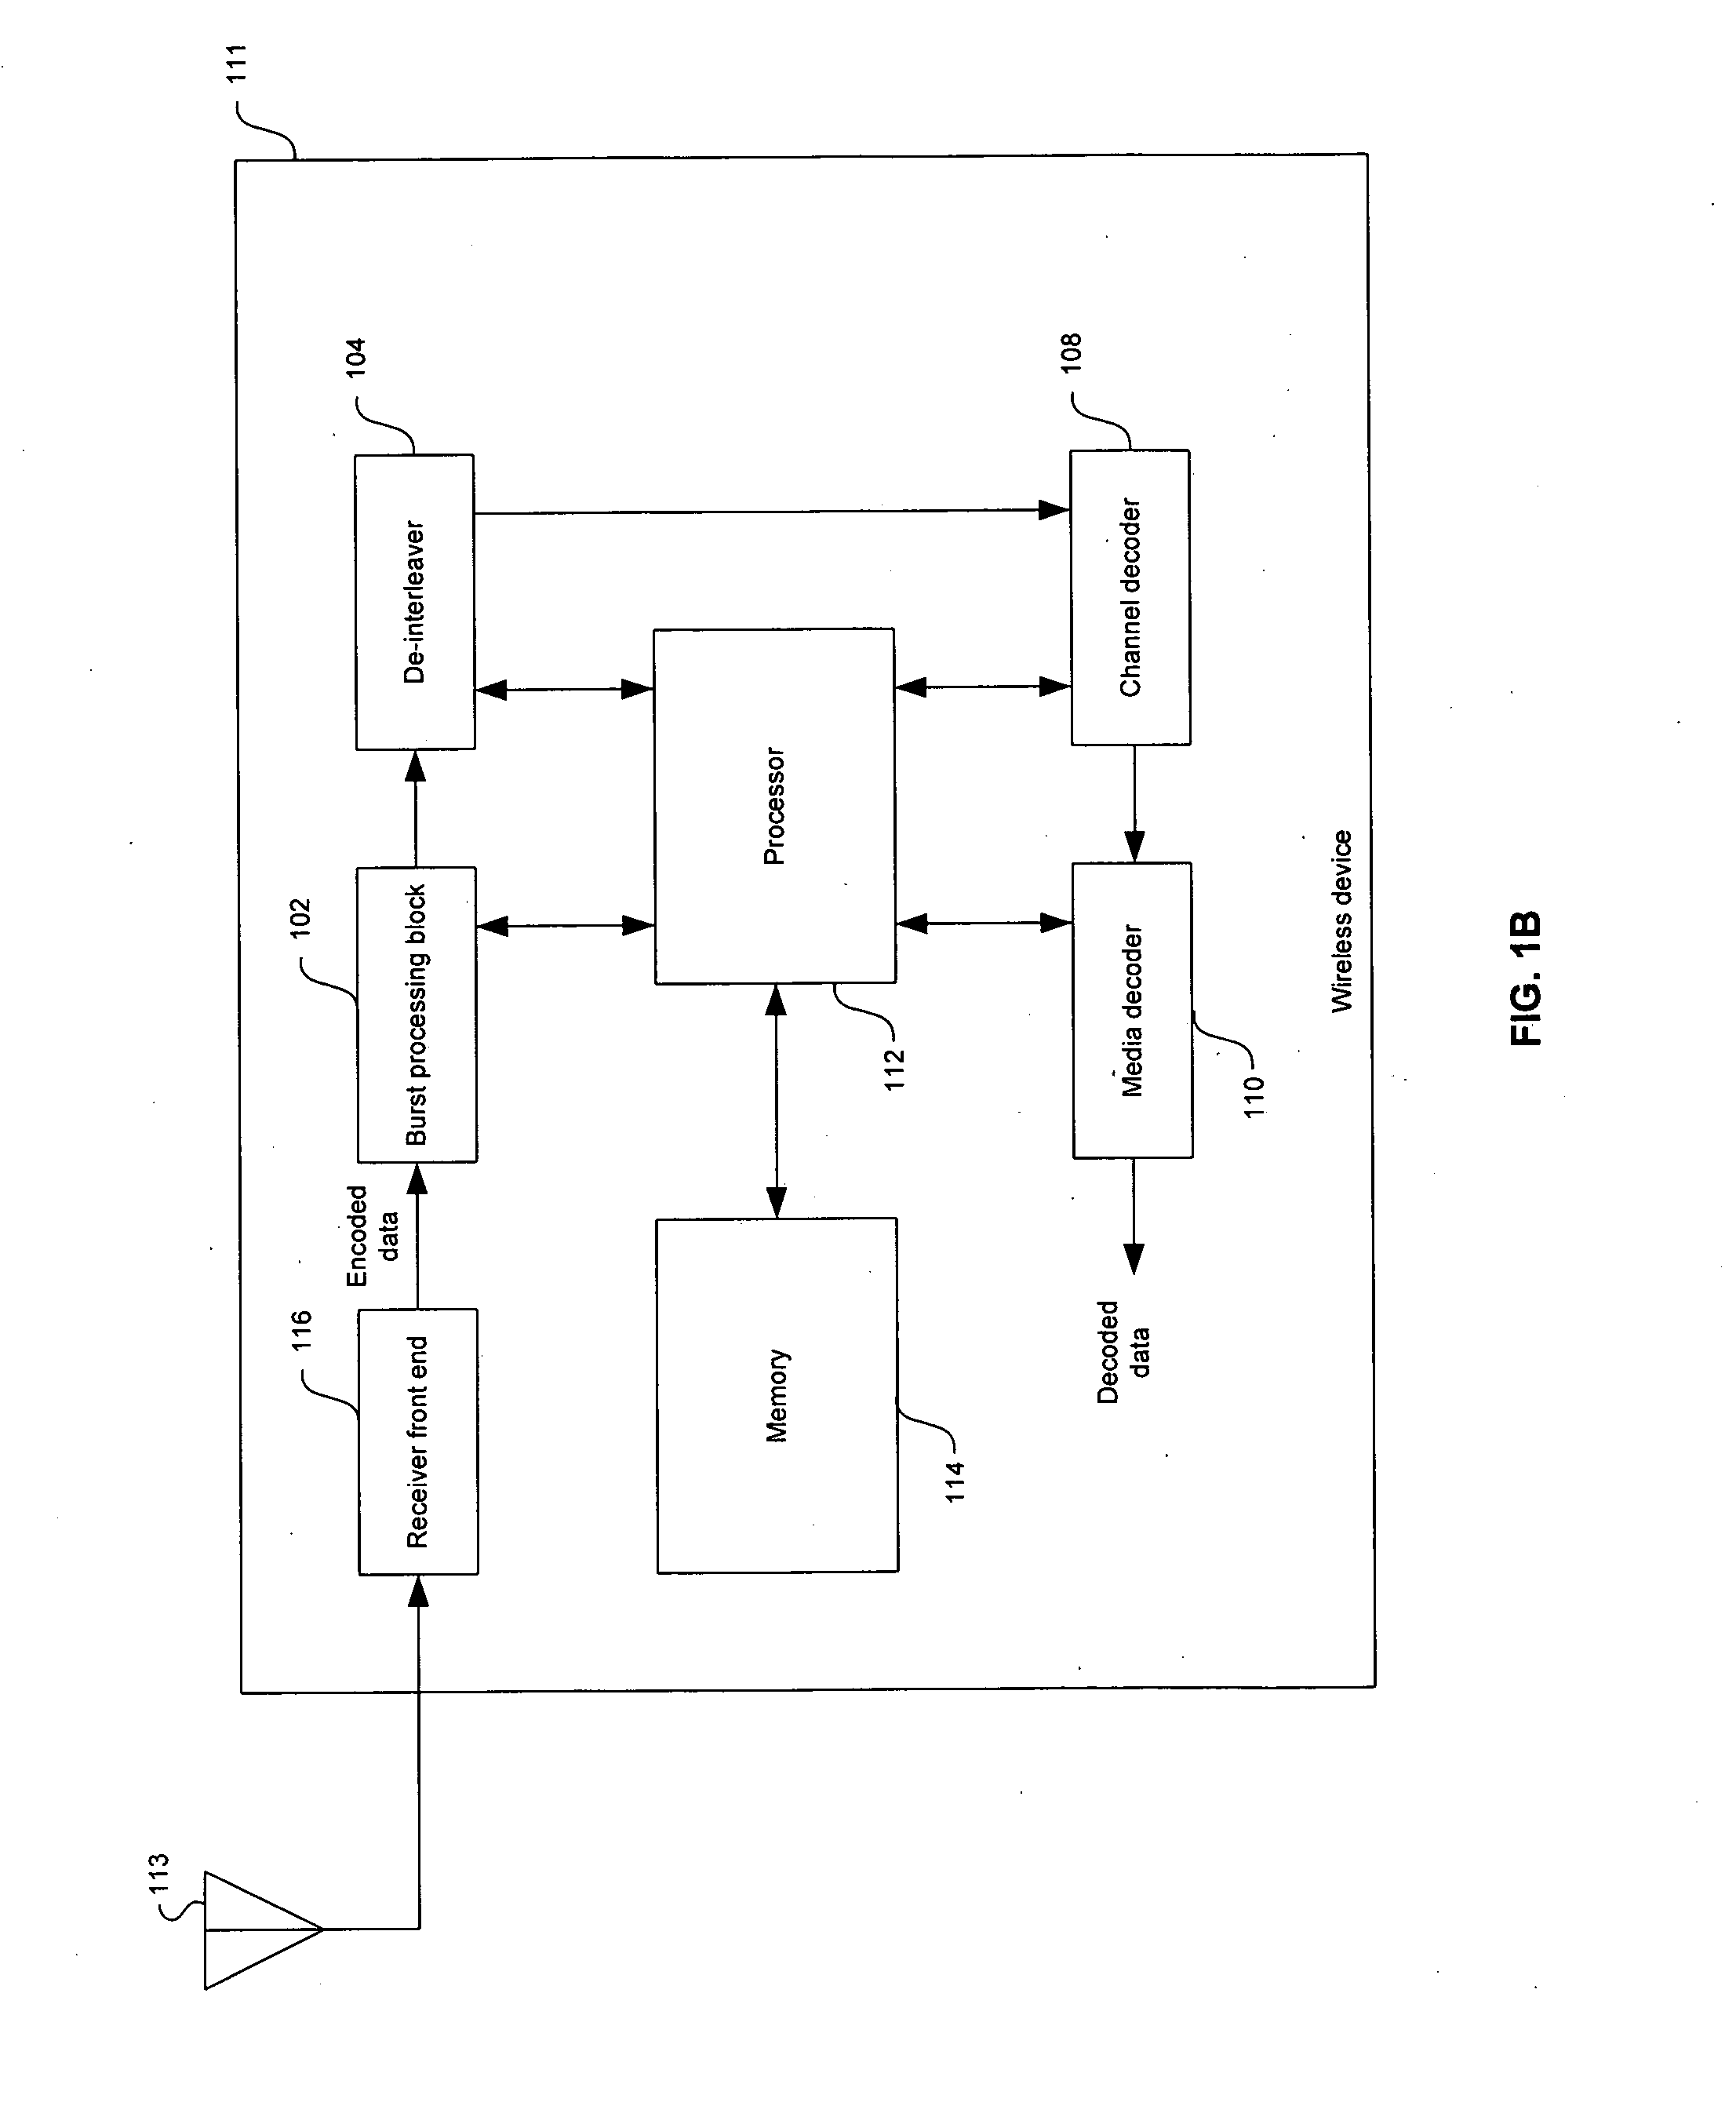 Method and system for decoding single antenna interference cancellation (SAIC) and redundancy processing adaptation using frame process